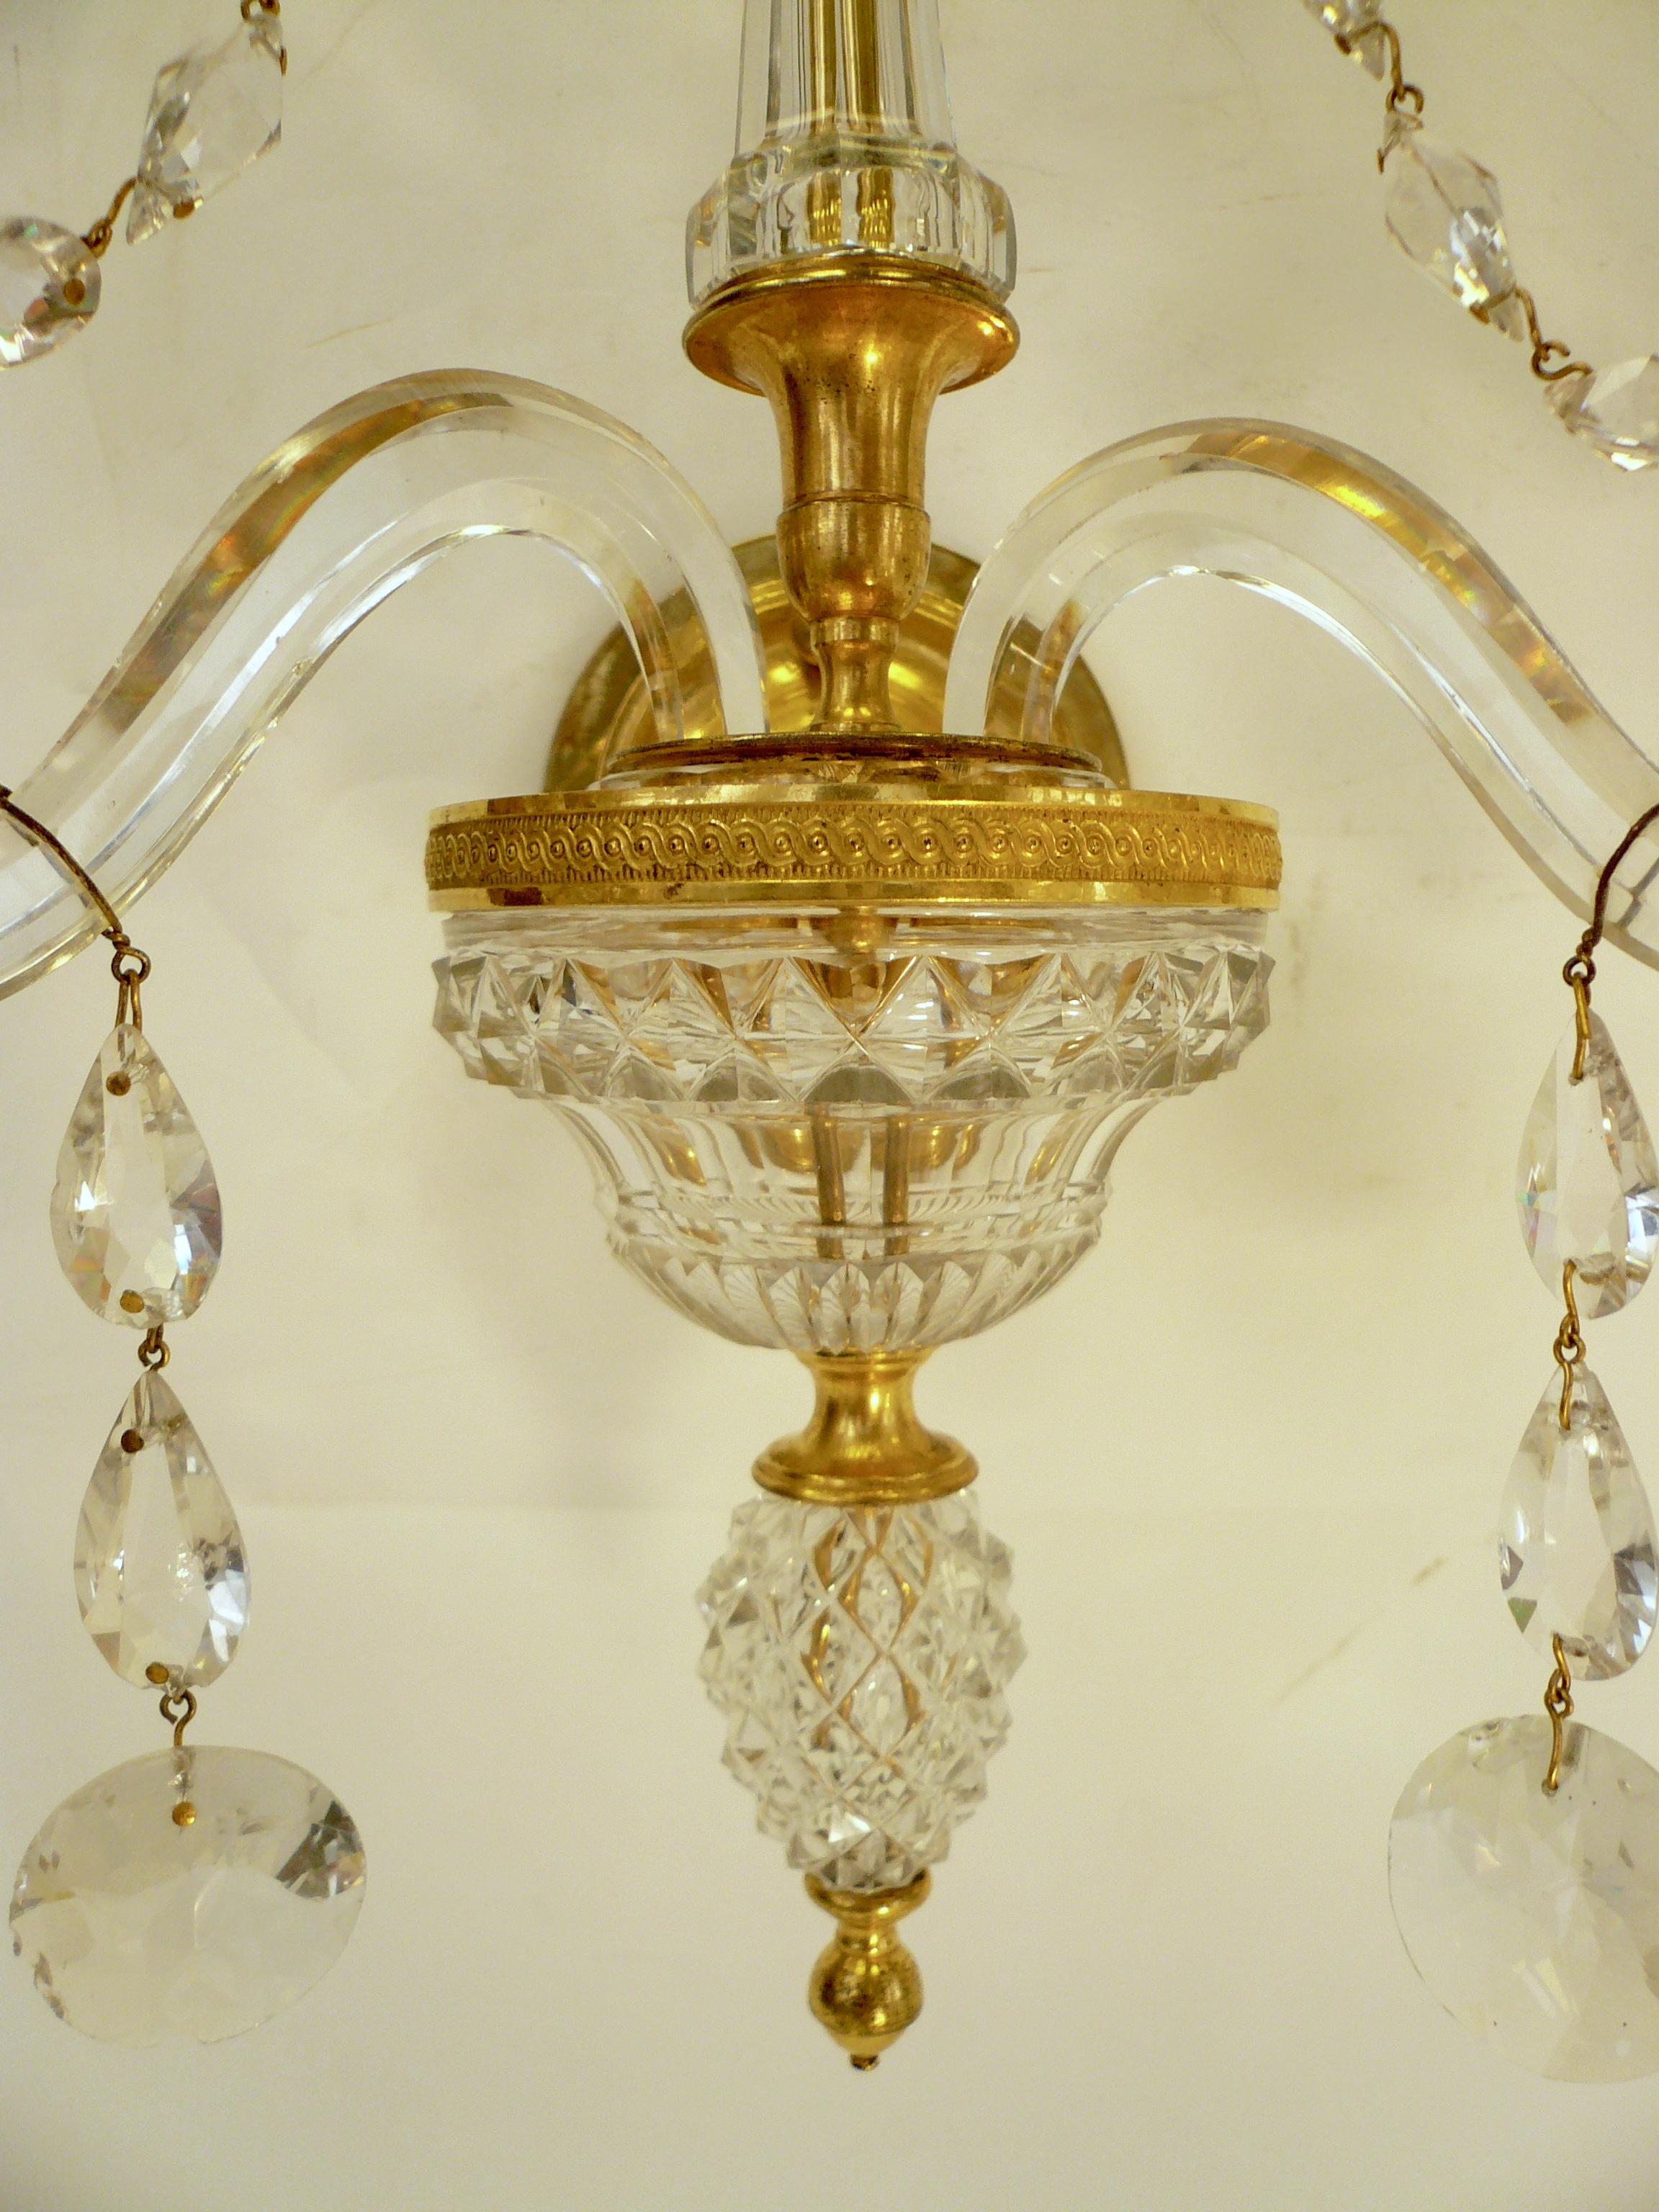 Exquisite Pair of Georgian Sconces in the Adam Style, Attributed to Wm. Parker For Sale 2